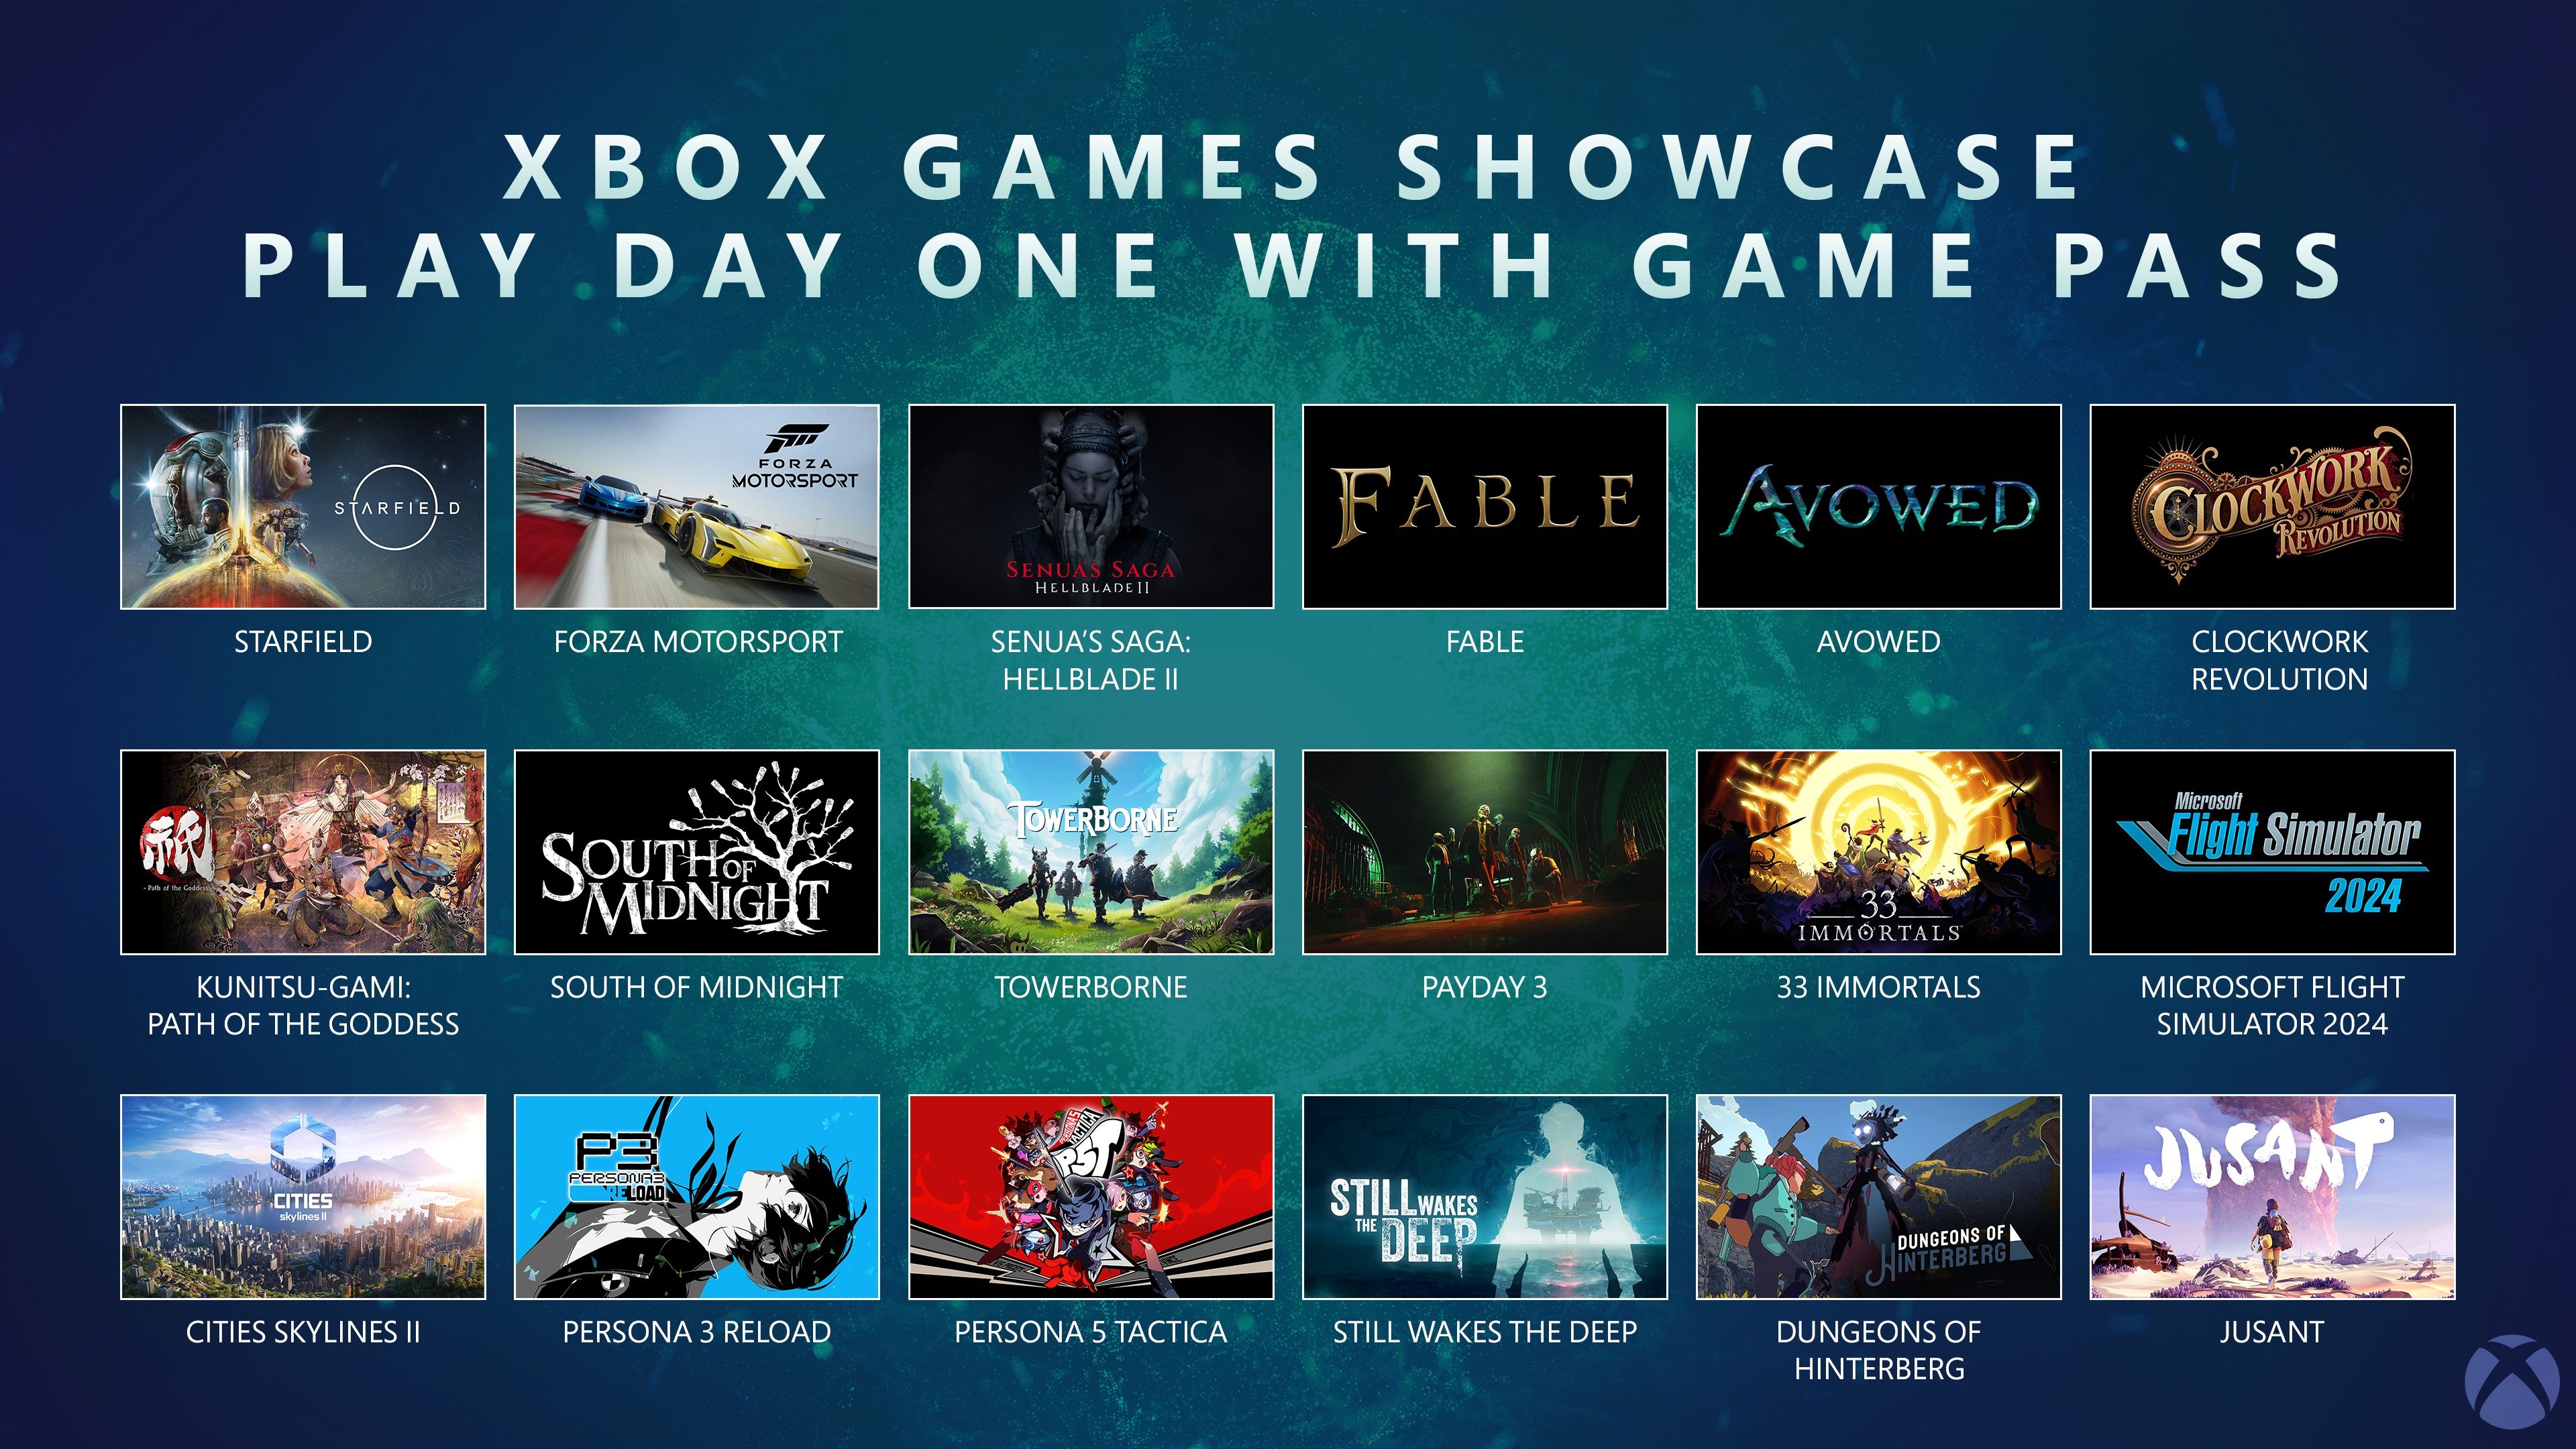 Every Xbox Game Pass Title Confirmed at the Xbox Games Showcase